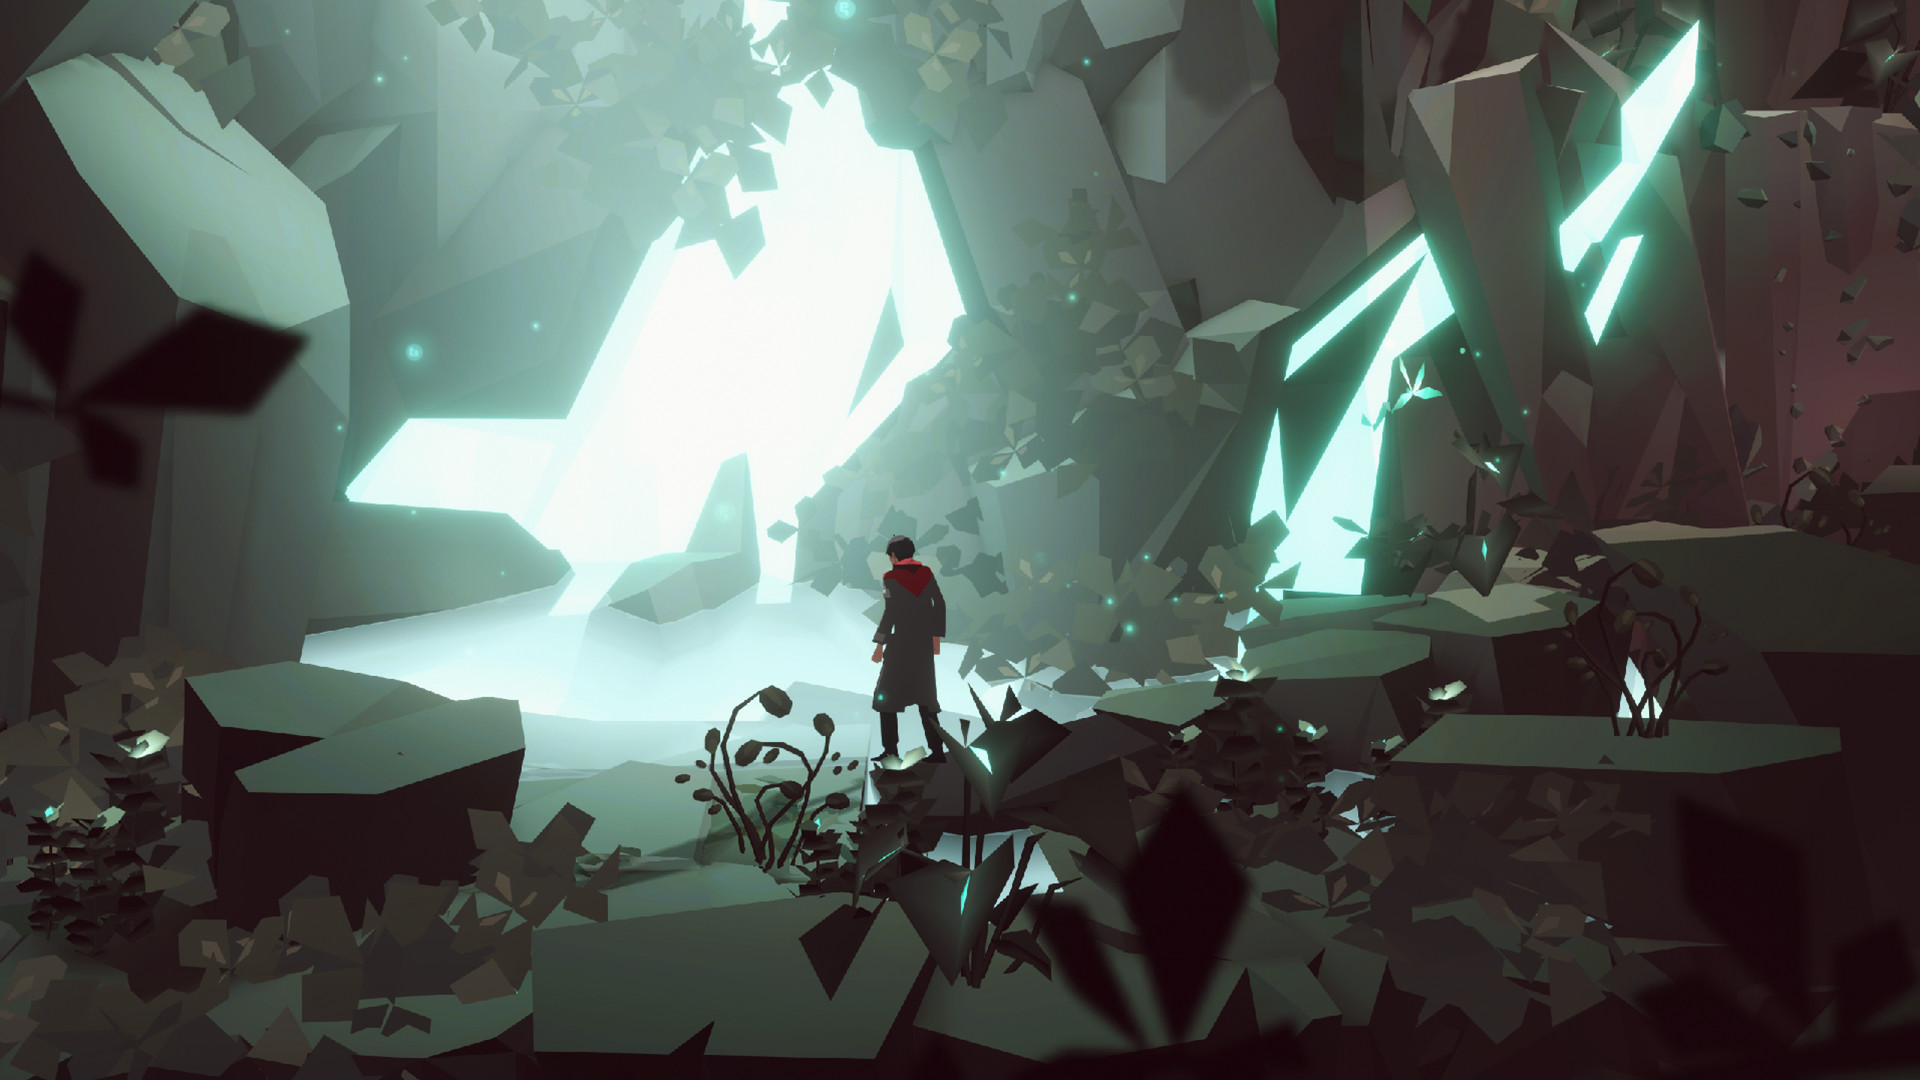 Screenshot from OPUS: Echo of Starsong. A male figure wearing a long coat stands before a glowing light, emitting from an opening in the midst of several rock and cavernous structures.